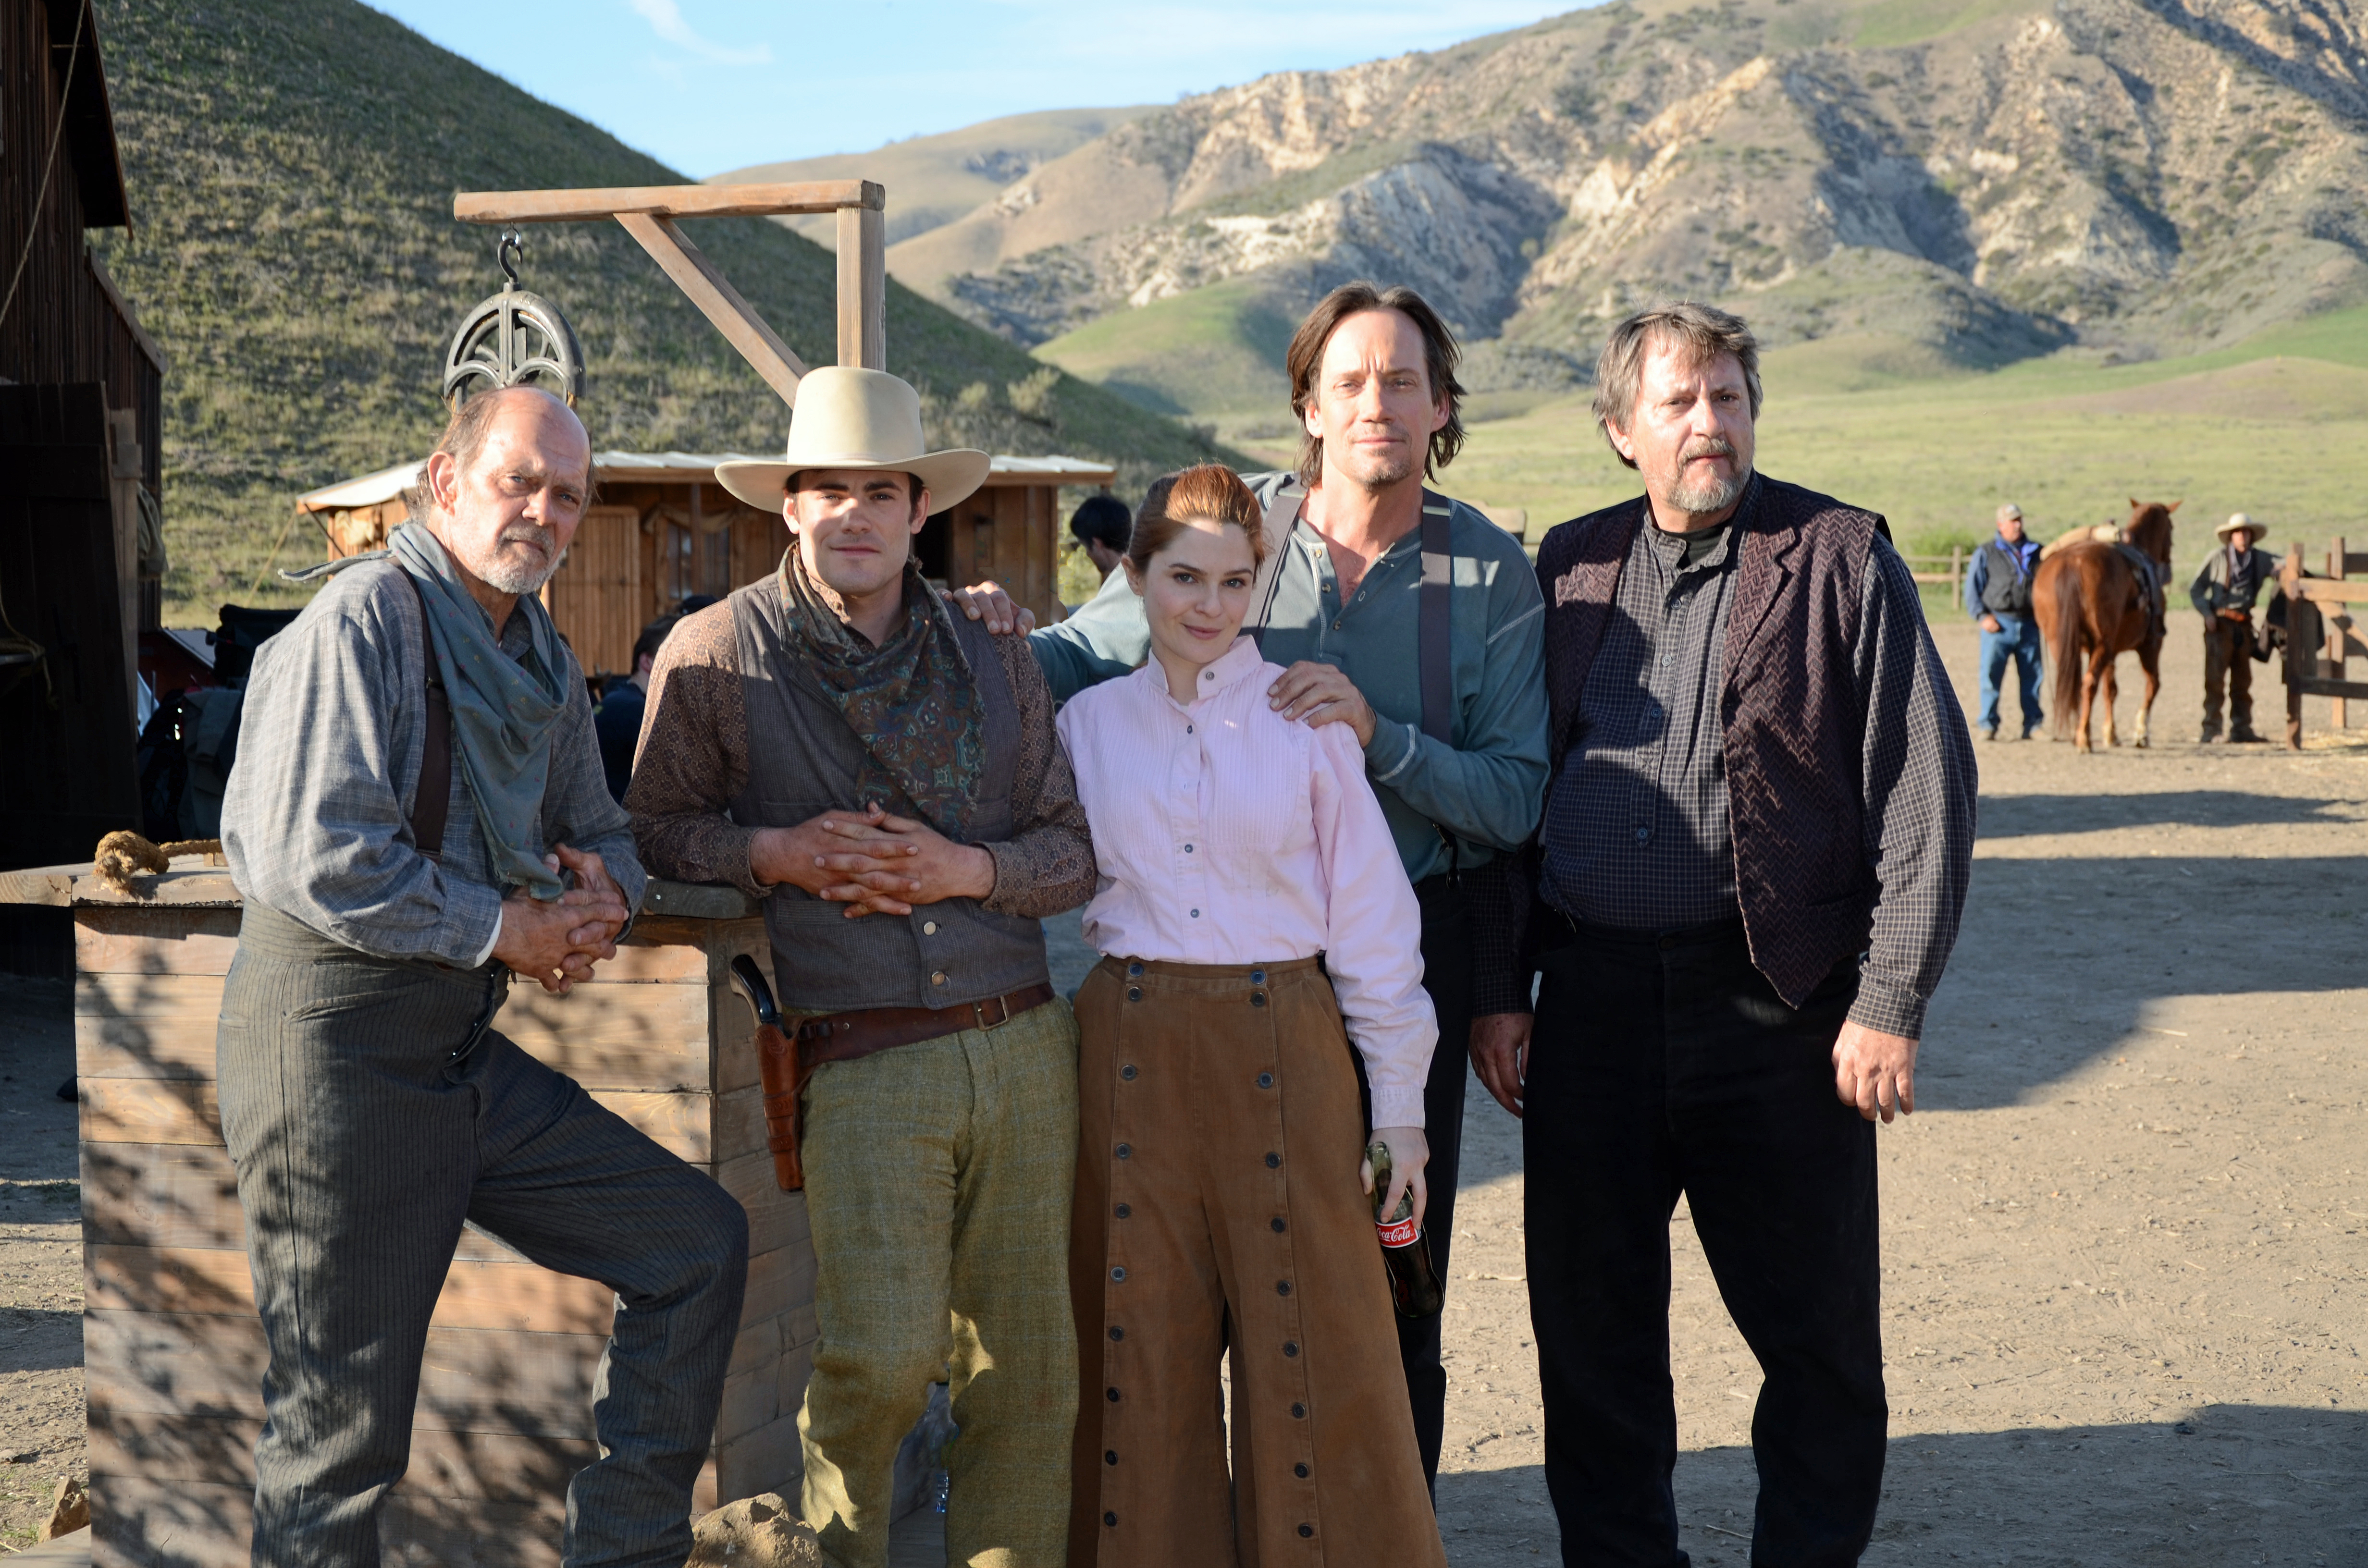 Dave Florek, Wes Brown, Shannon Lucio, Kevin Sorbo, and Stephen Bridgewater in Shadow on the Mesa, 2013